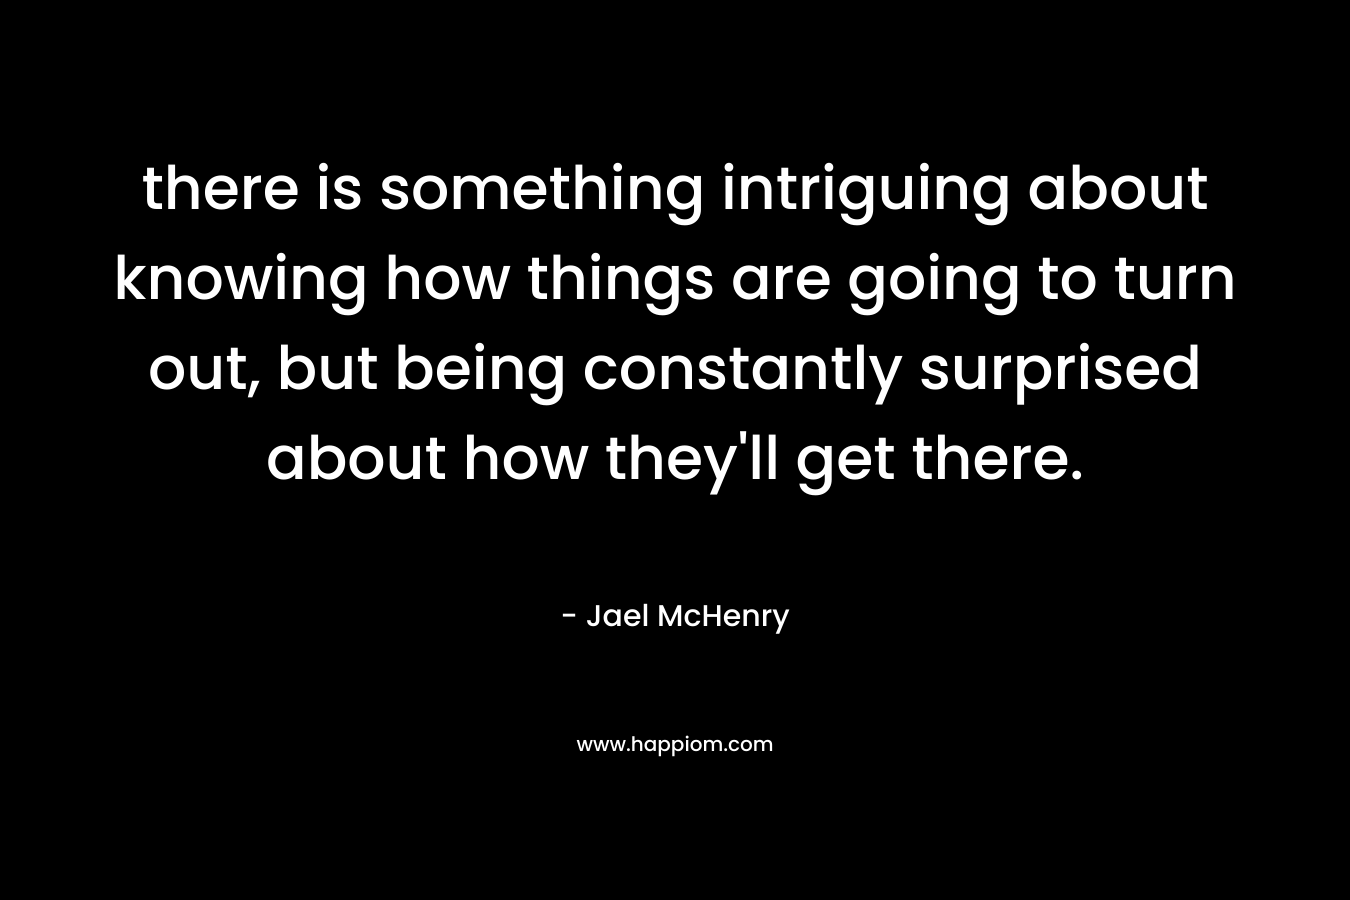 there is something intriguing about knowing how things are going to turn out, but being constantly surprised about how they’ll get there. – Jael McHenry